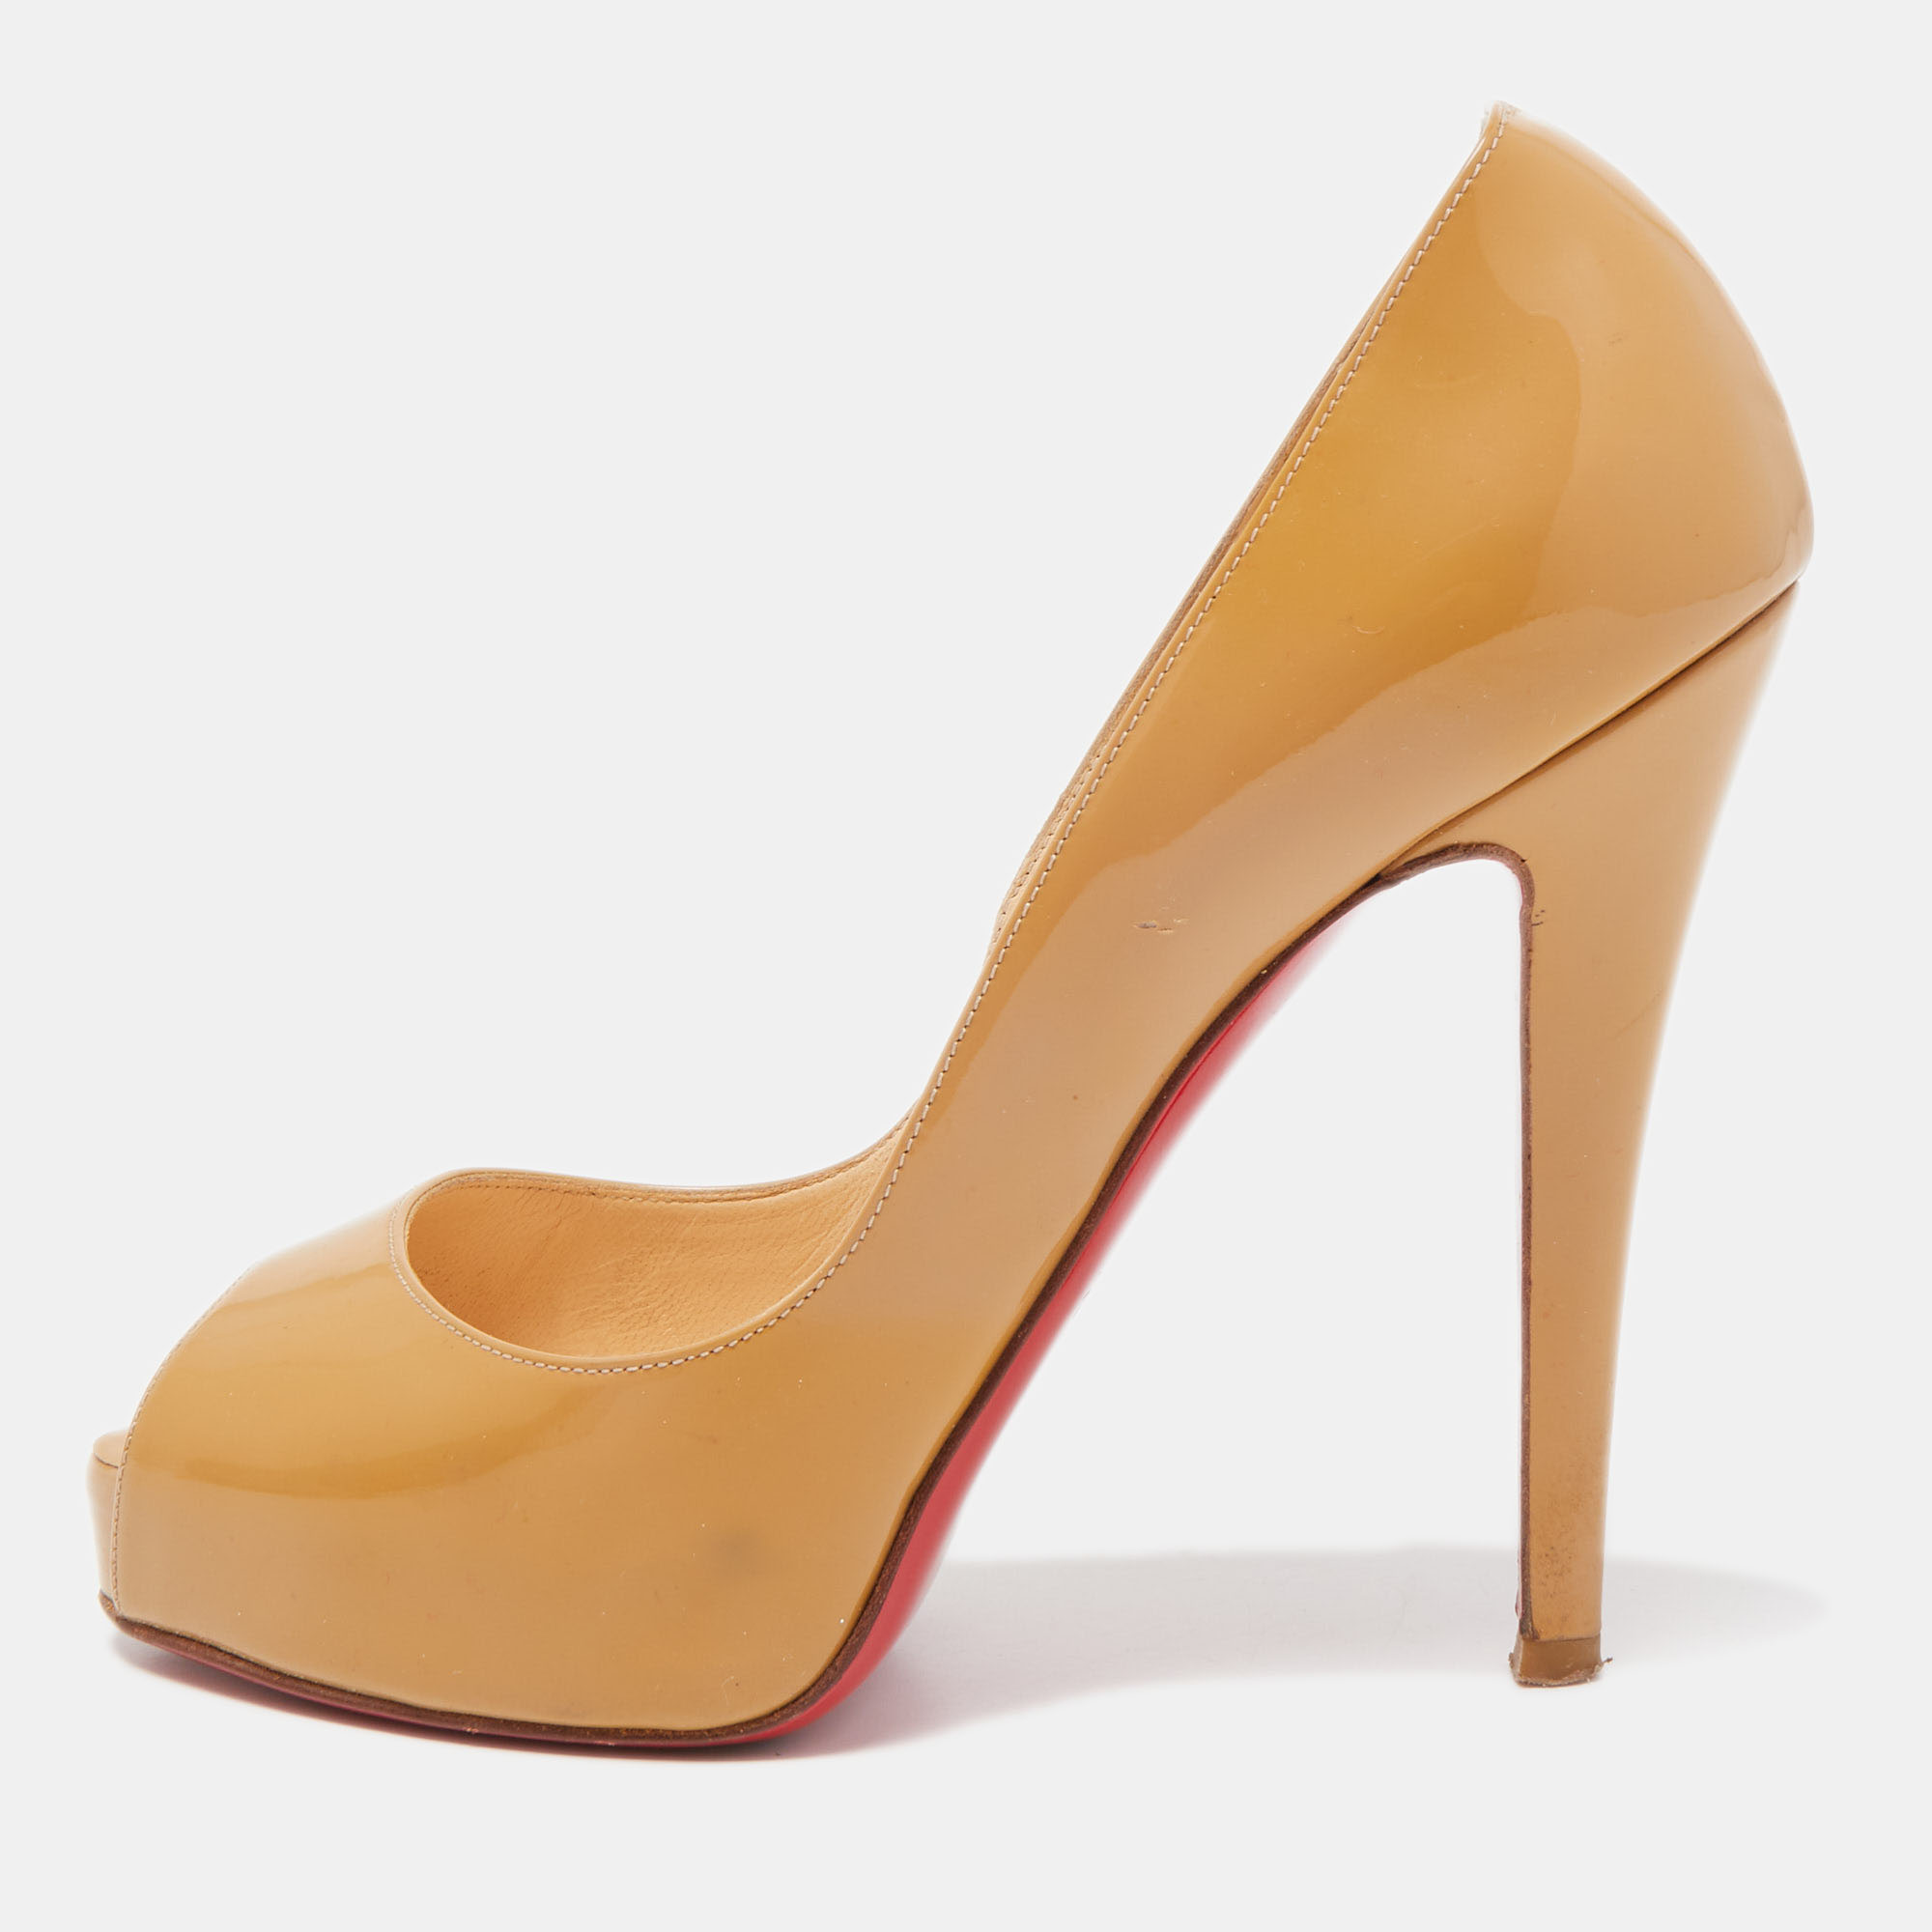 Pre-owned Christian Louboutin Beige Patent Leather Very Prive Pumps Size 35